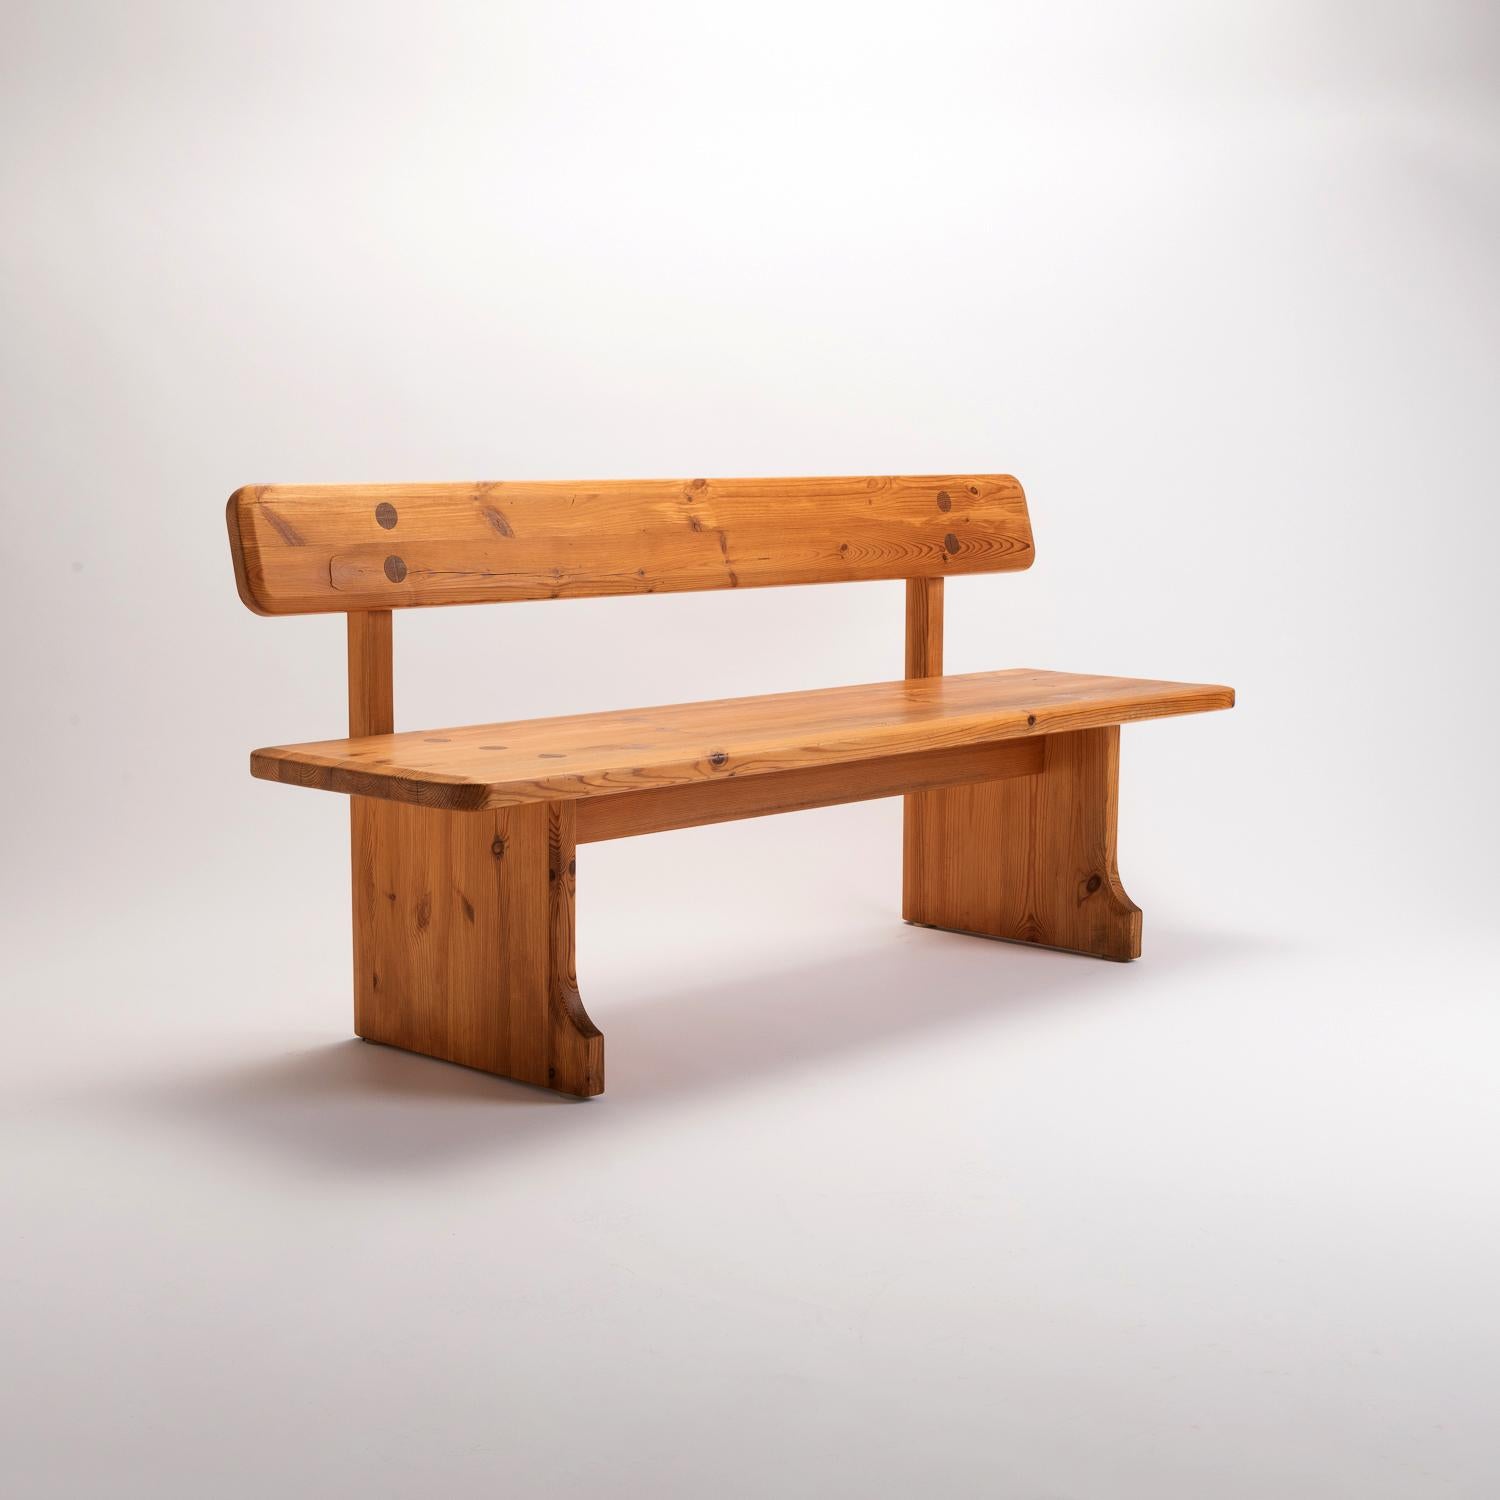 A midcentury solid pine bench by Carl Malmsten for Karl Andersson and Söner, Sweden, 1960s. Excellent original condition.